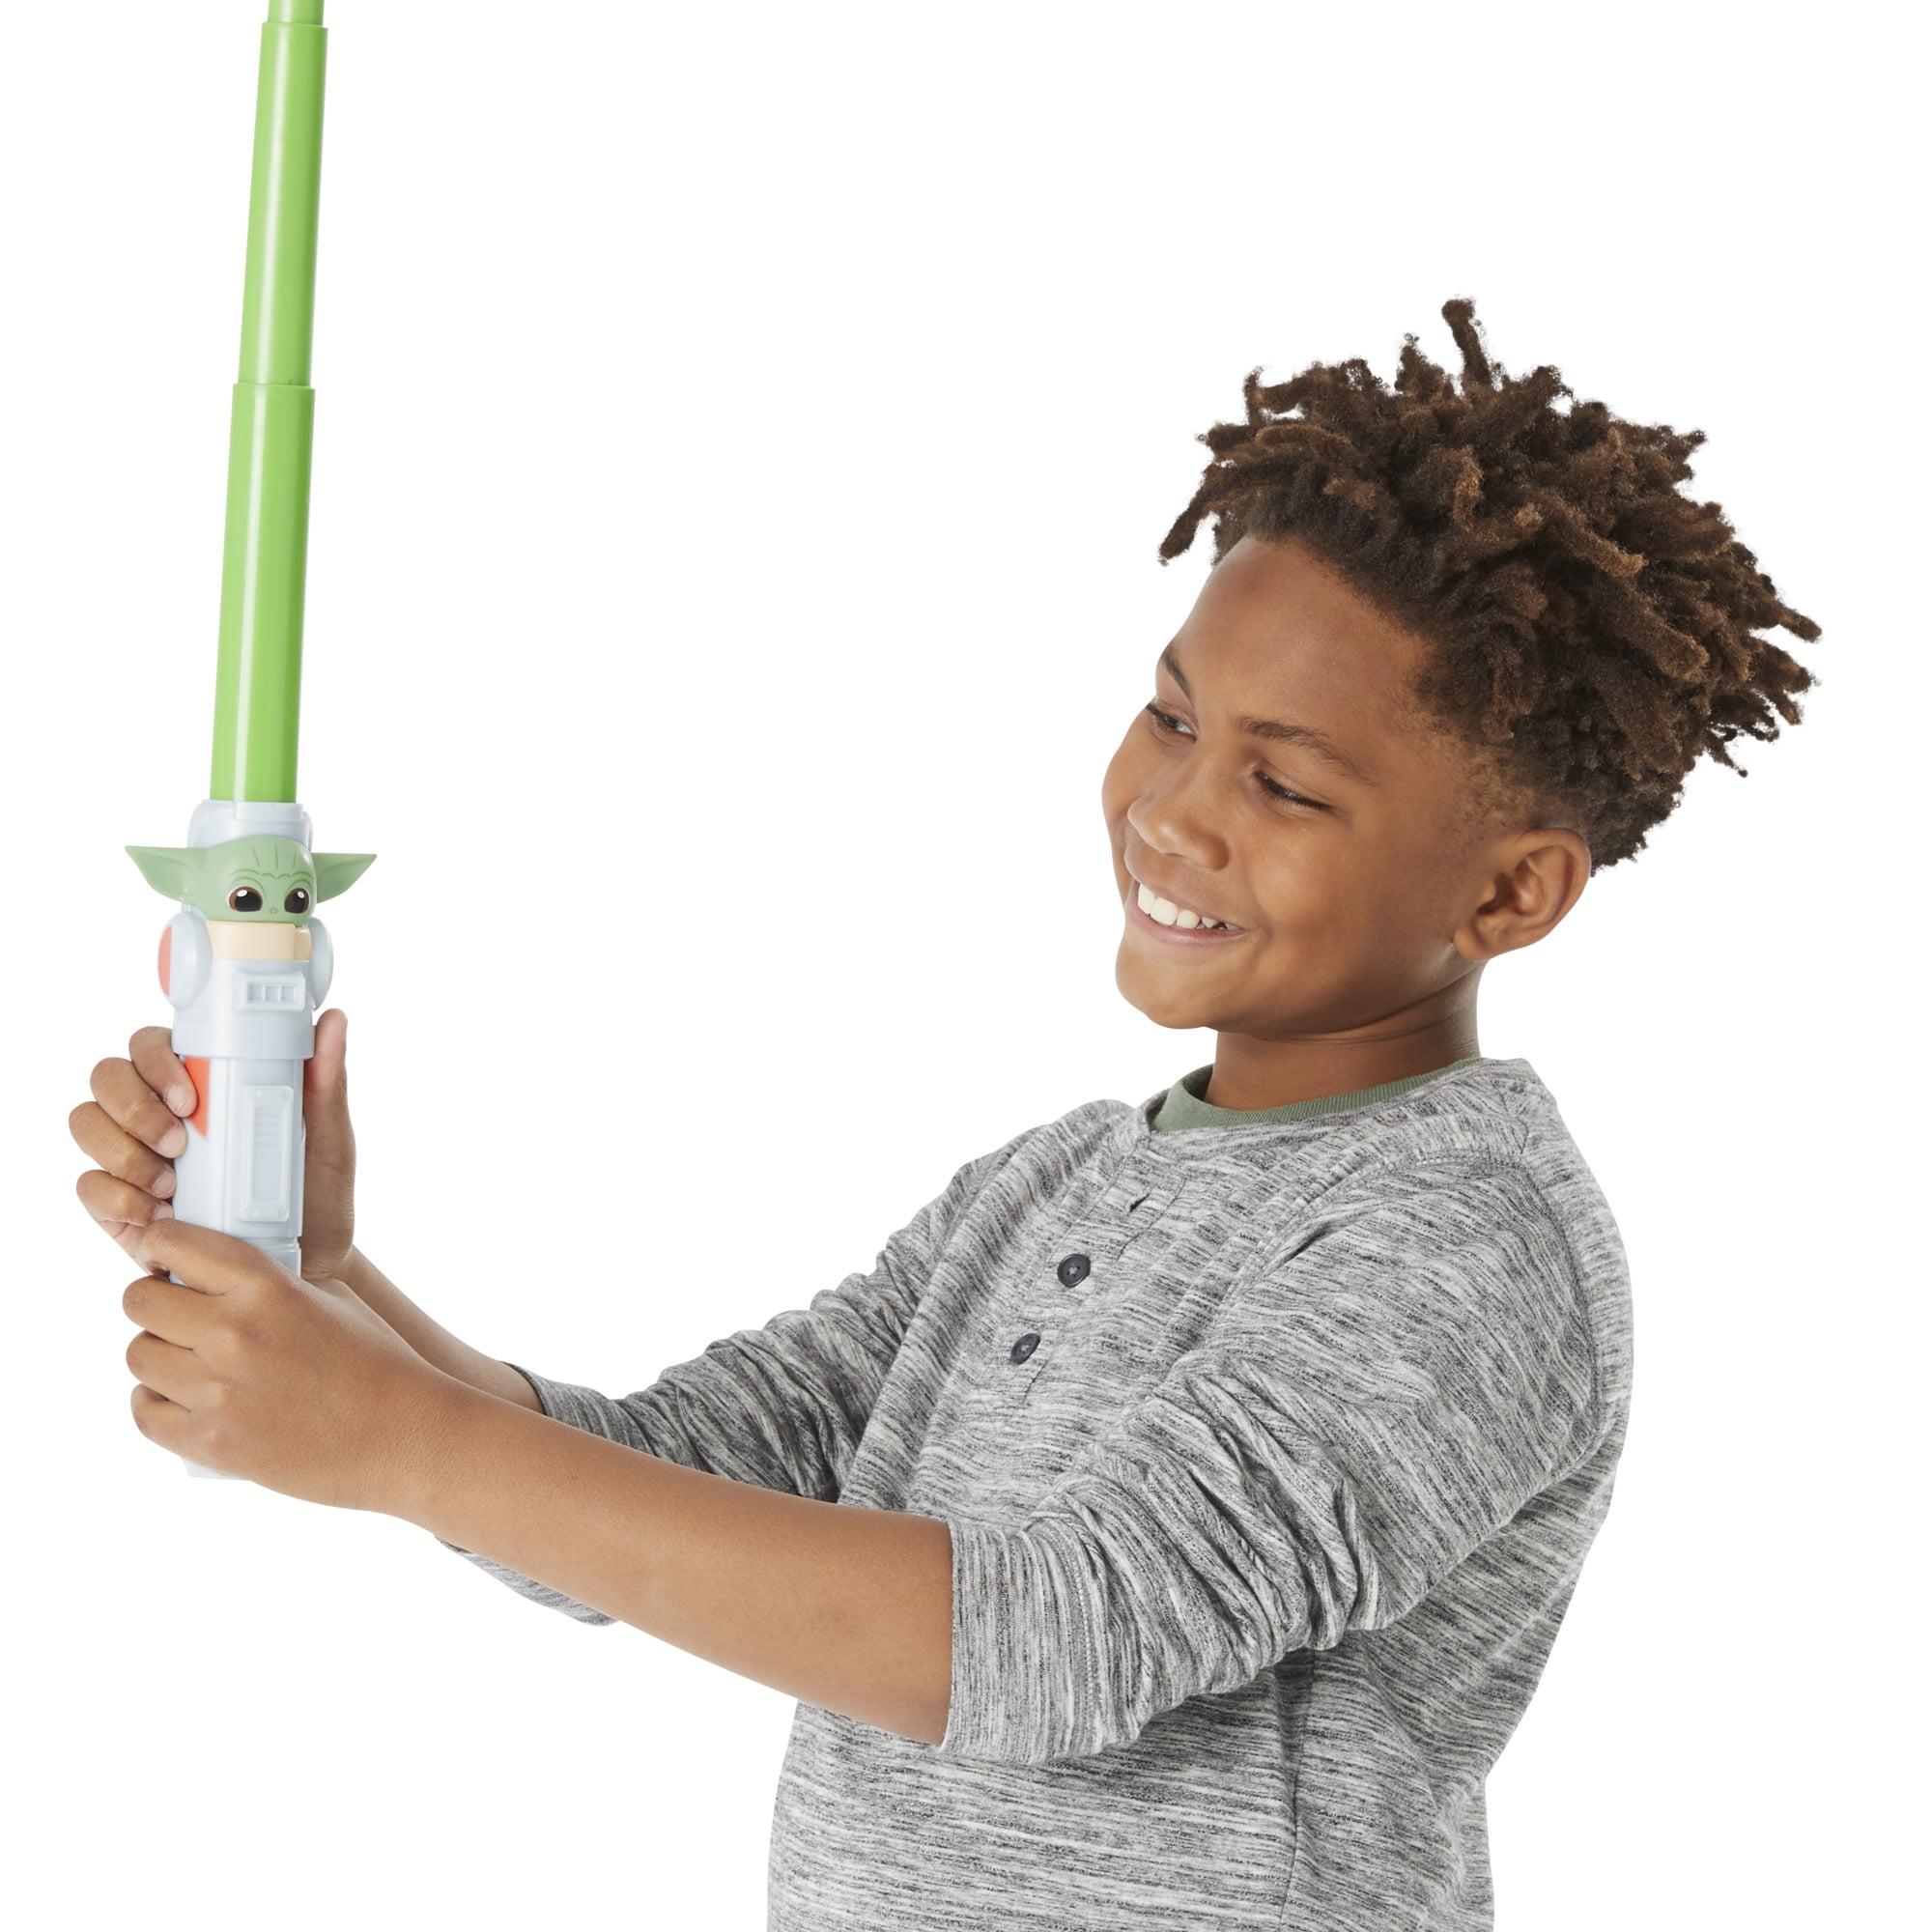 Star Wars Lightsaber Squad The Child Extendable Green Lightsaber Roleplay